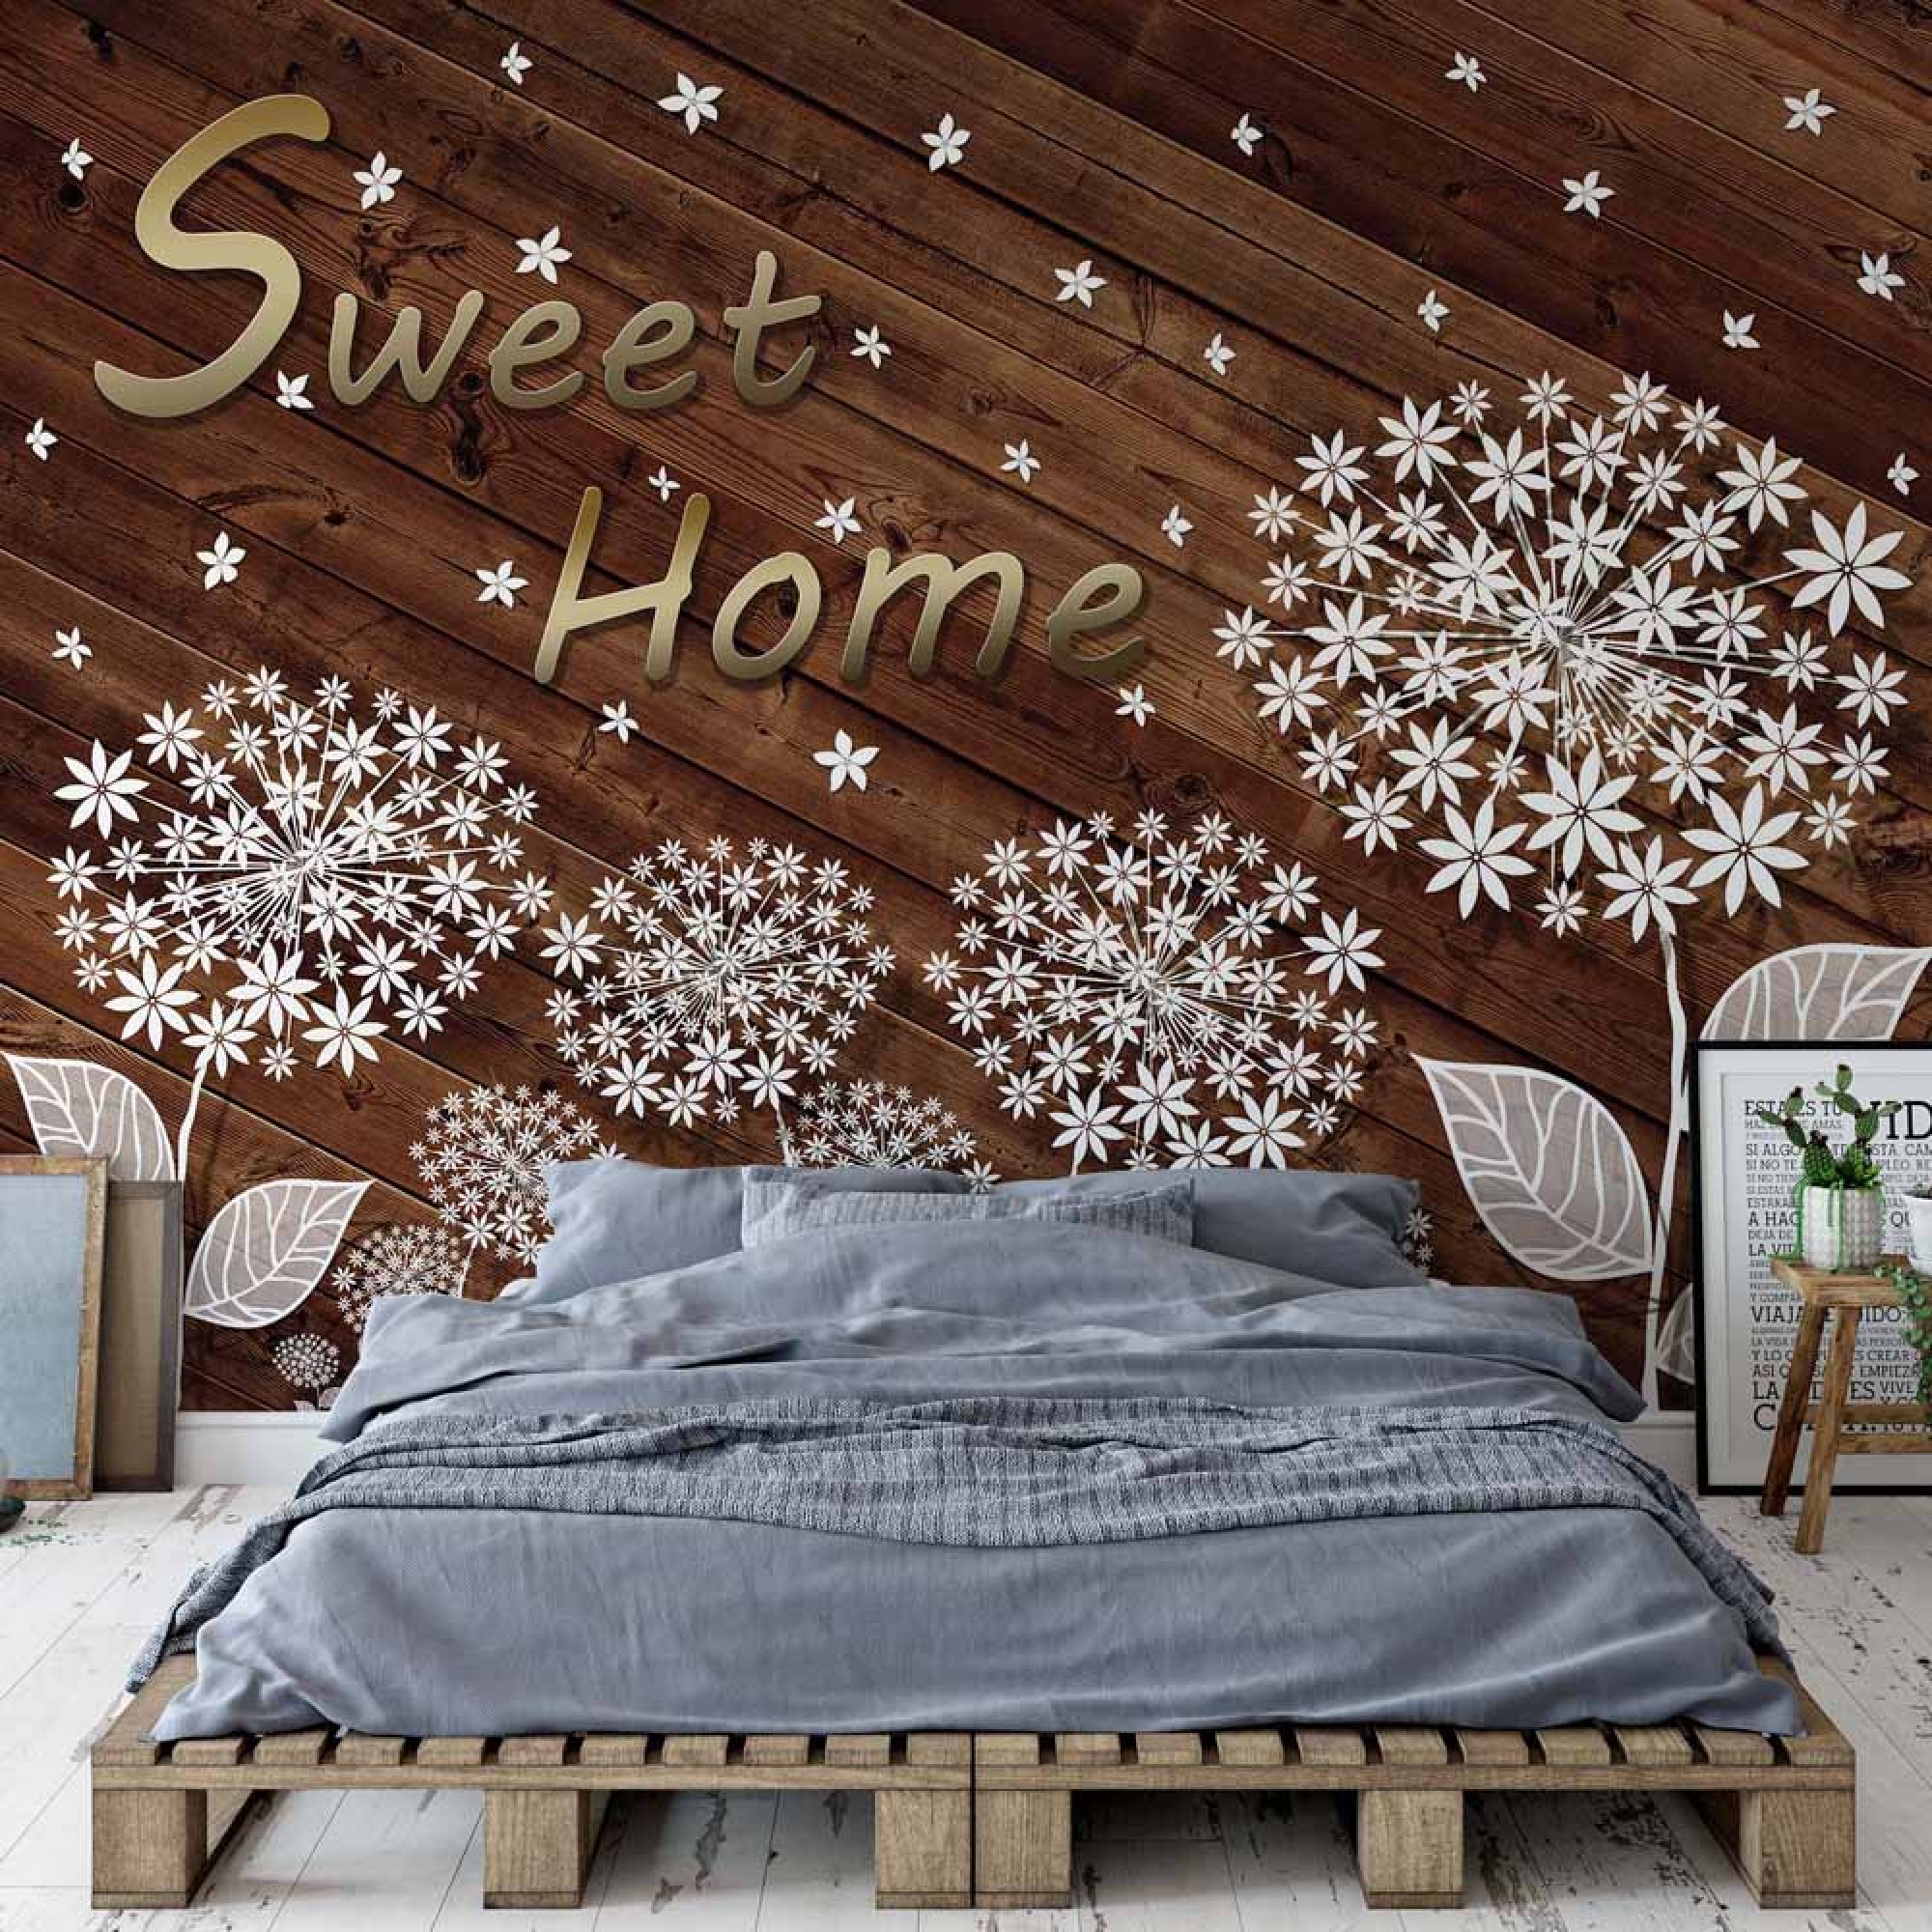 Modern Flowers And Wood Planks Sweet Home - Modern Forest Themed Bedroom - HD Wallpaper 